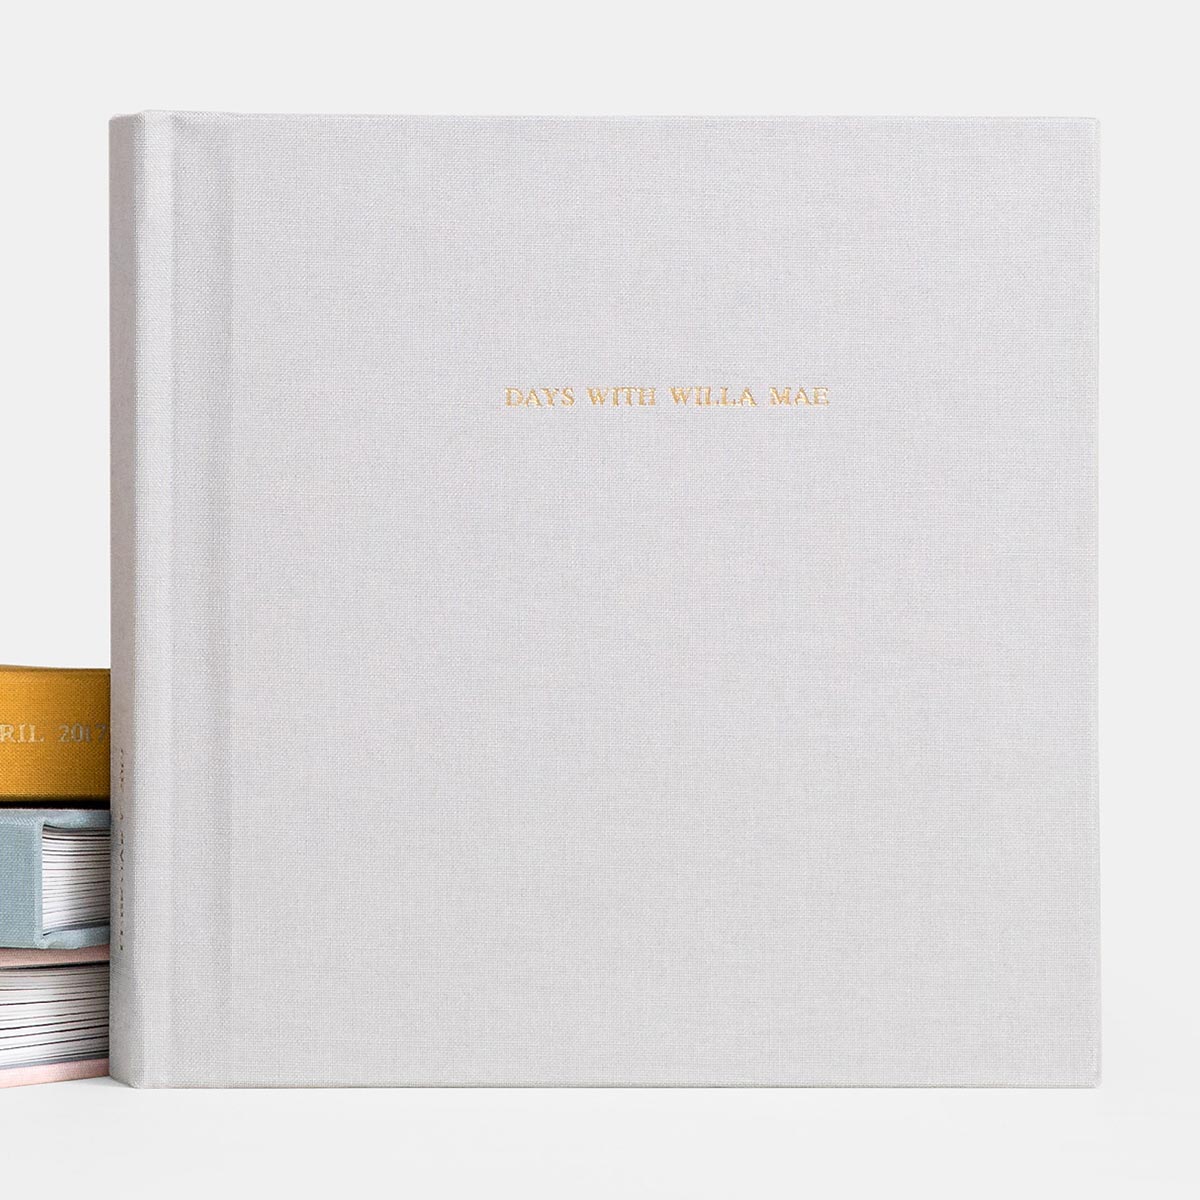 Foil-stamped gold title on cover of Everyday Photo Book titled days with willa mae